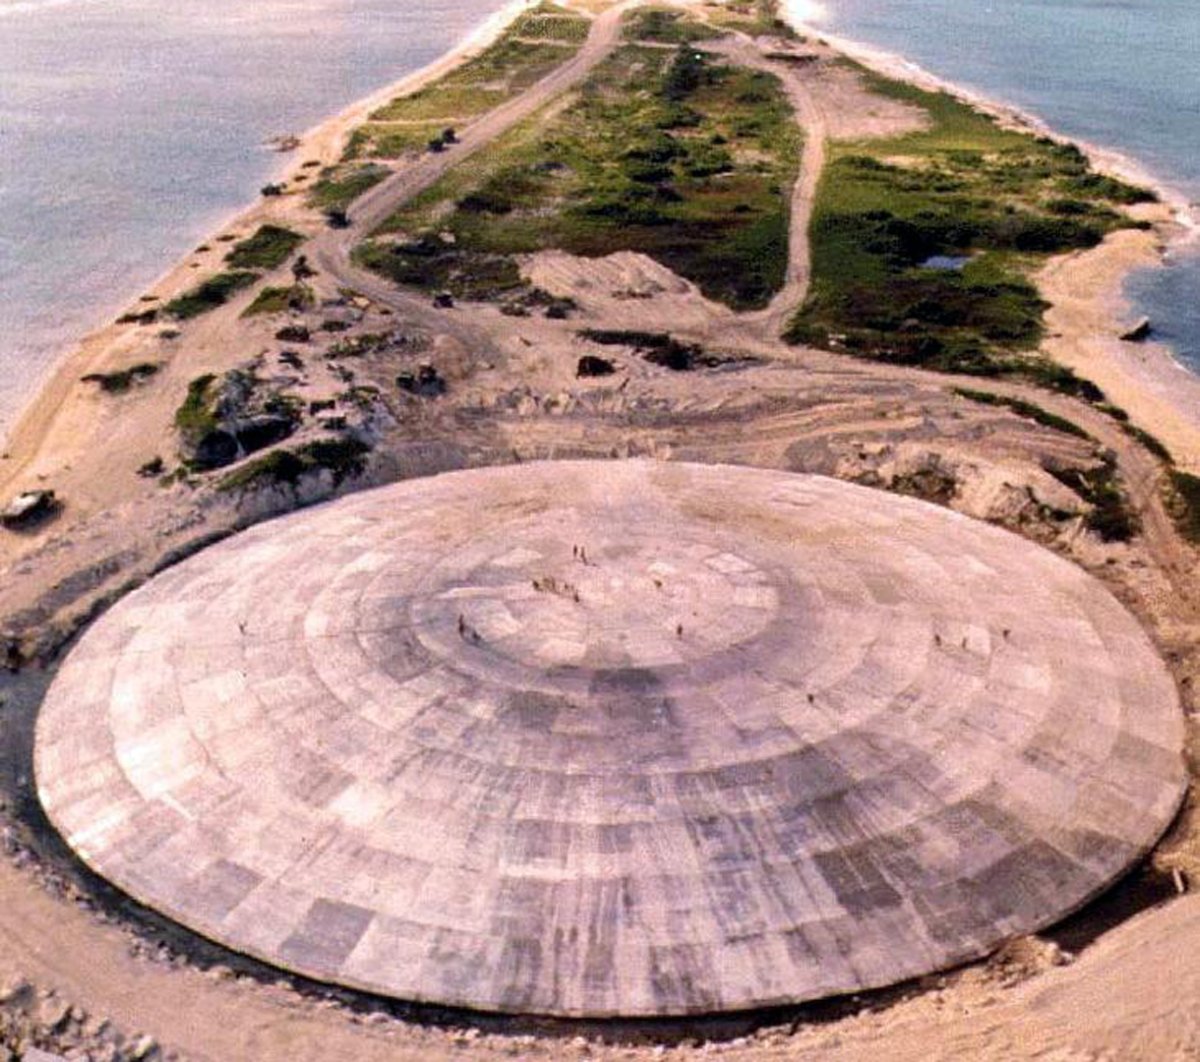 Picture taken by the U.S. Defense Nuclear Agency in 1980, shows the huge dome, which has just been completed over top of a crater left by one of the 43 nuclear blasts on the island, expected to last 25,000 years, capping off radioactive debris from nuclear tests over Runit Island in Enewetak in the Marshall Islands. 